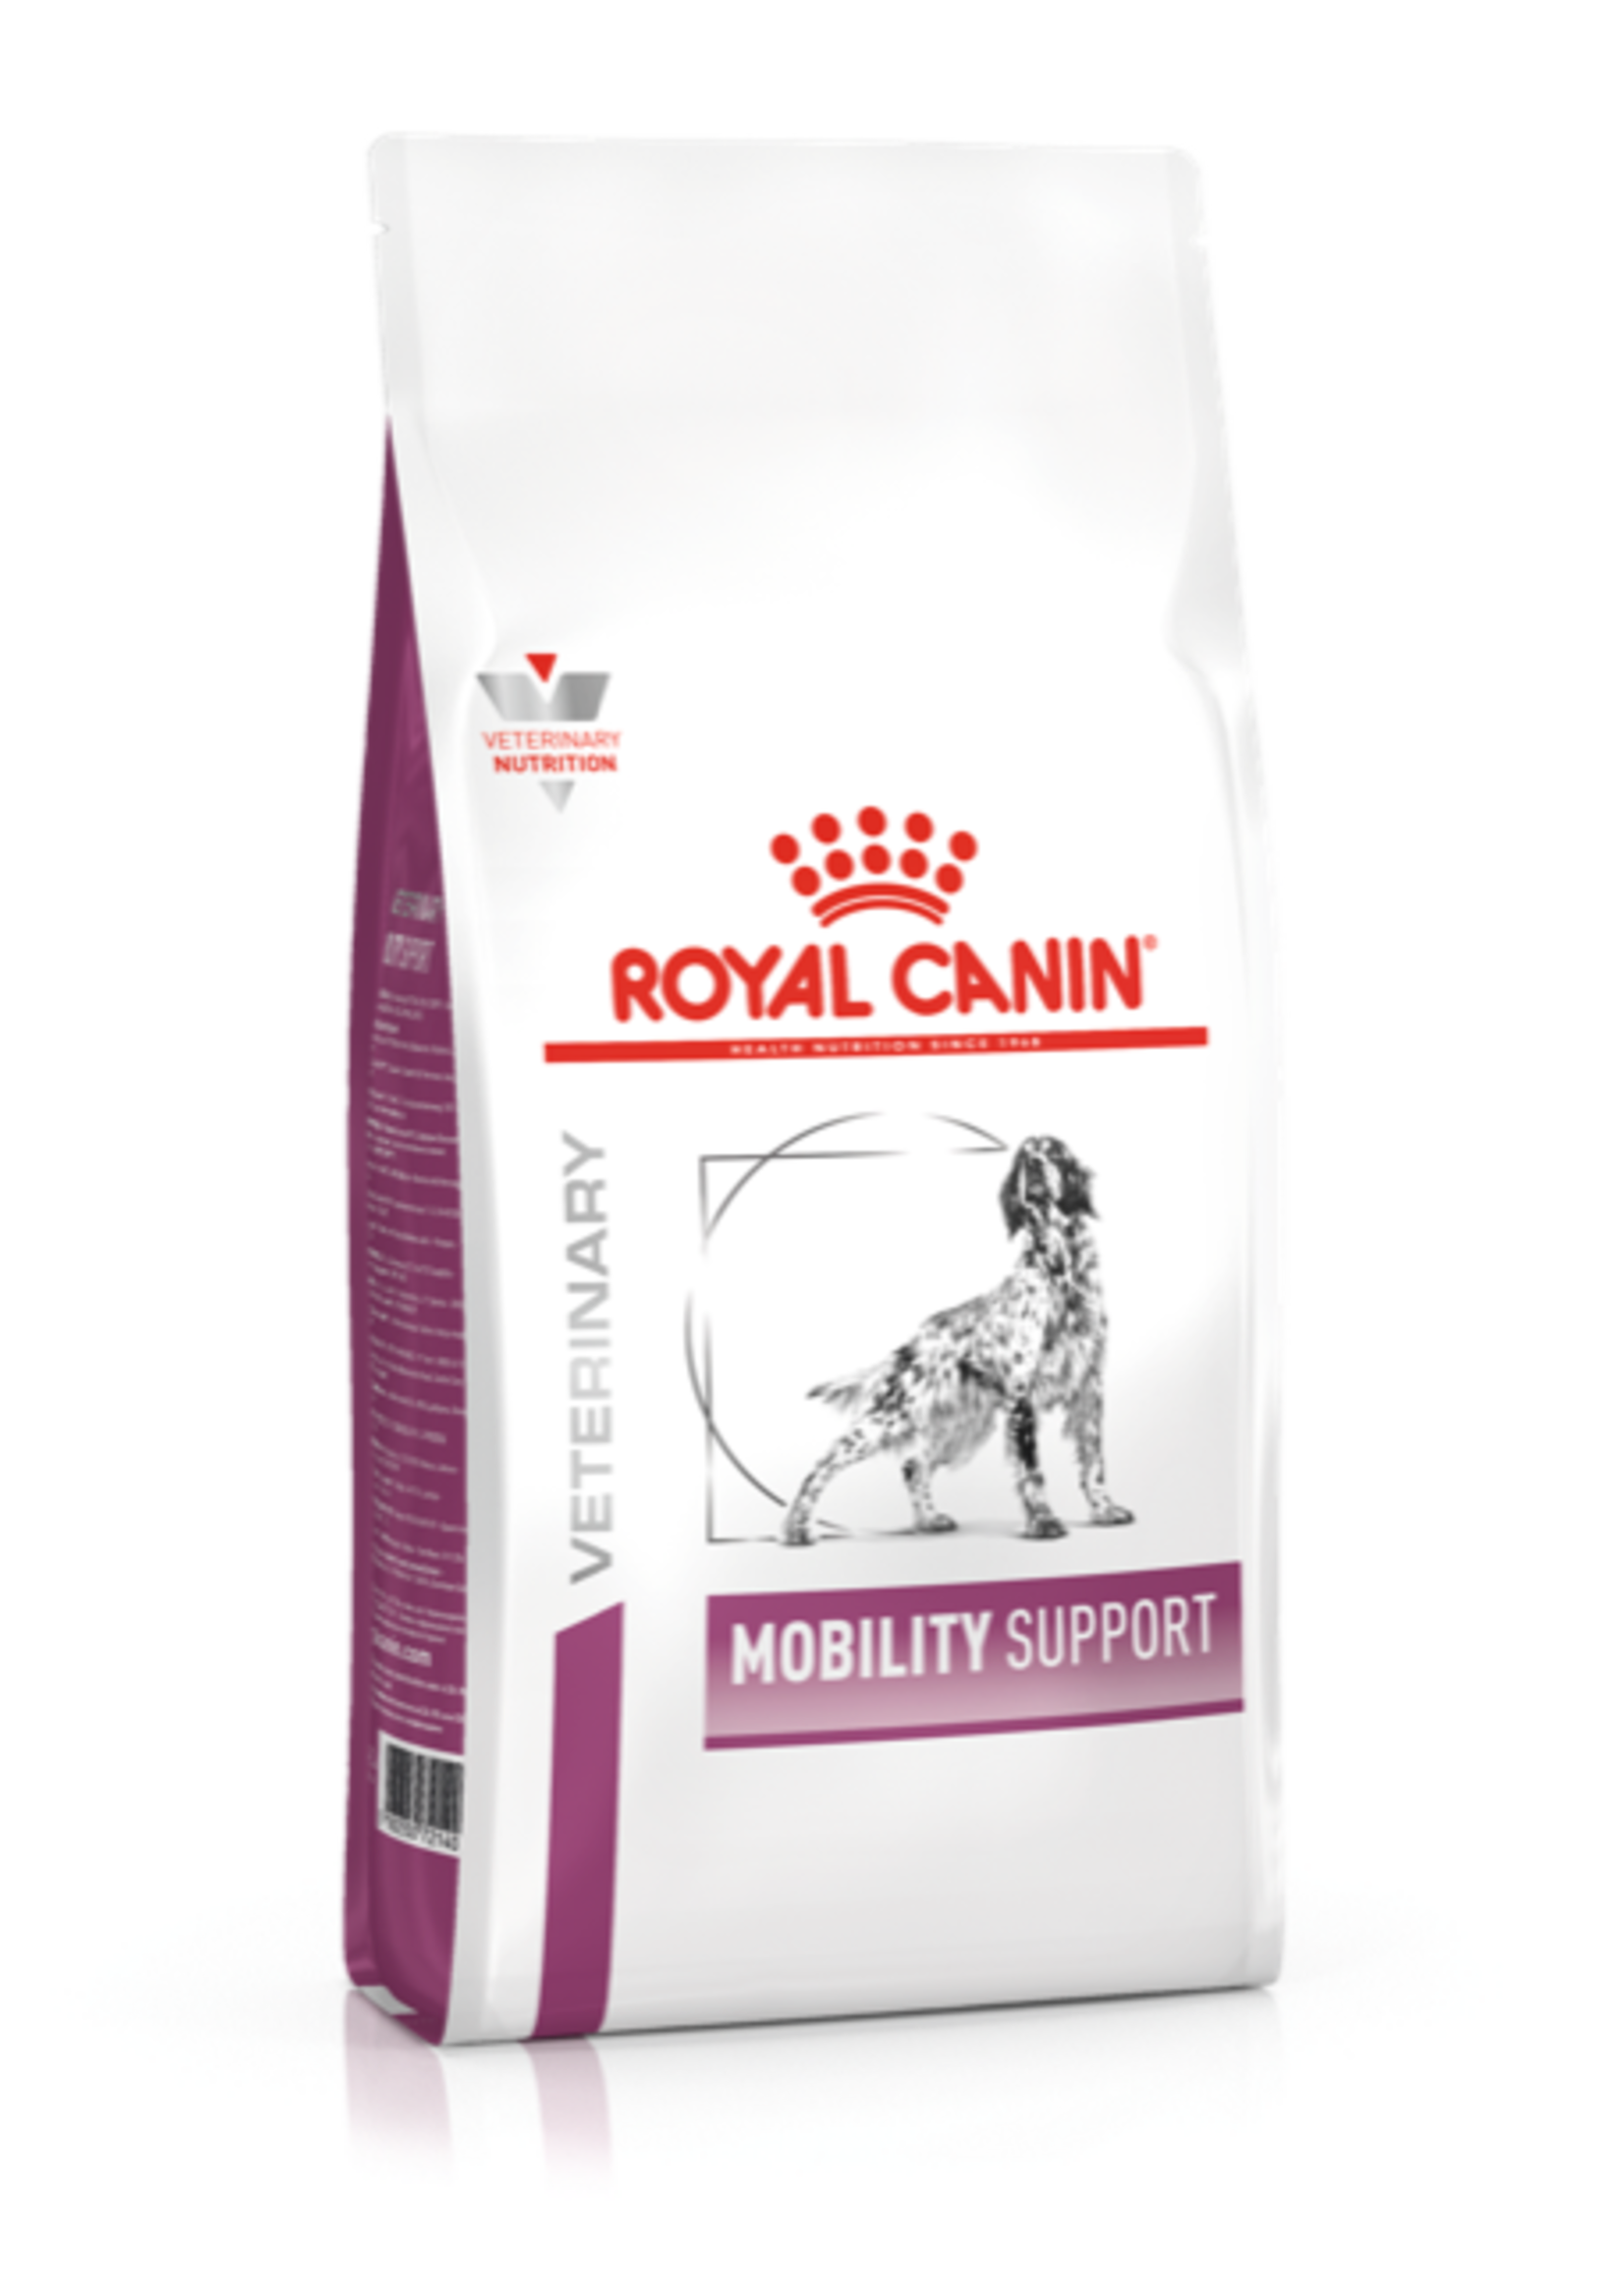 Royal Canin Royal Canin Vdiet Canine Mobility Support 7kg